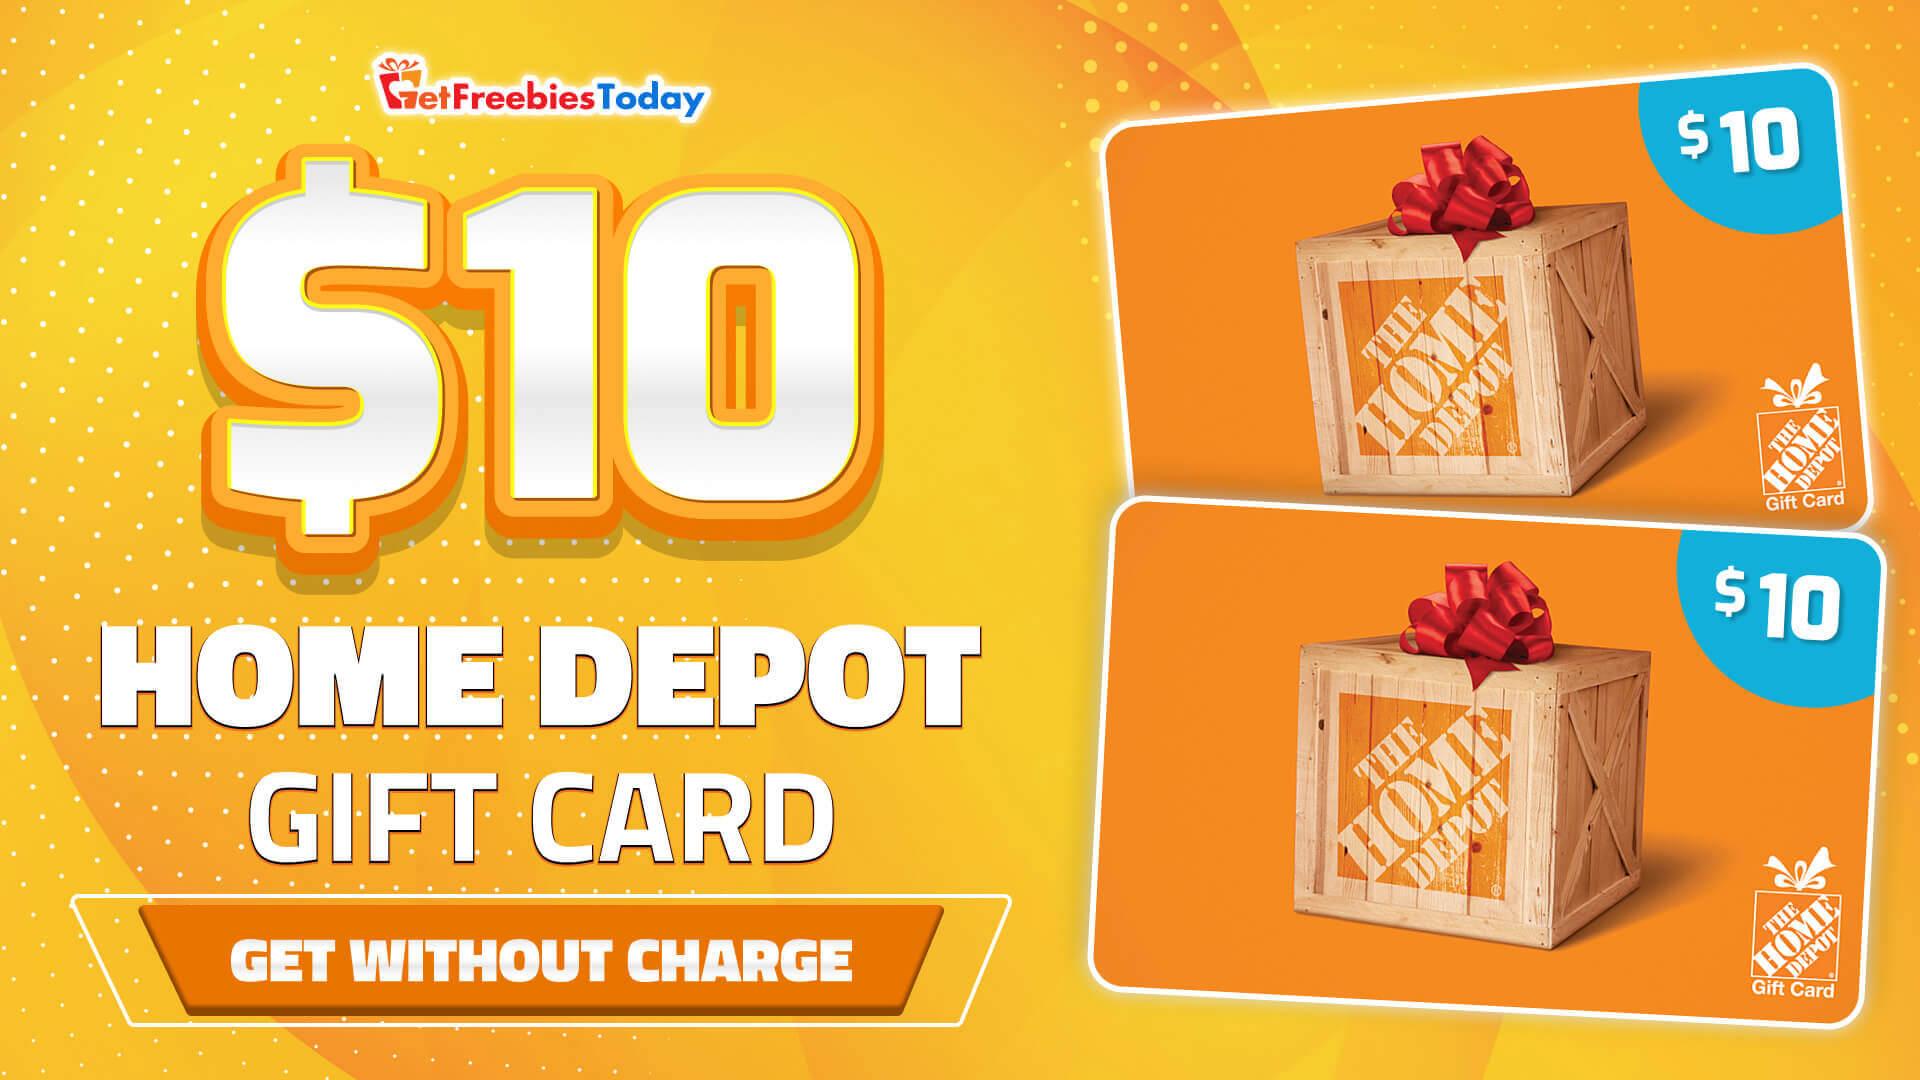 jill-of-all-deals-free-10-home-depot-gift-card-for-texas-and